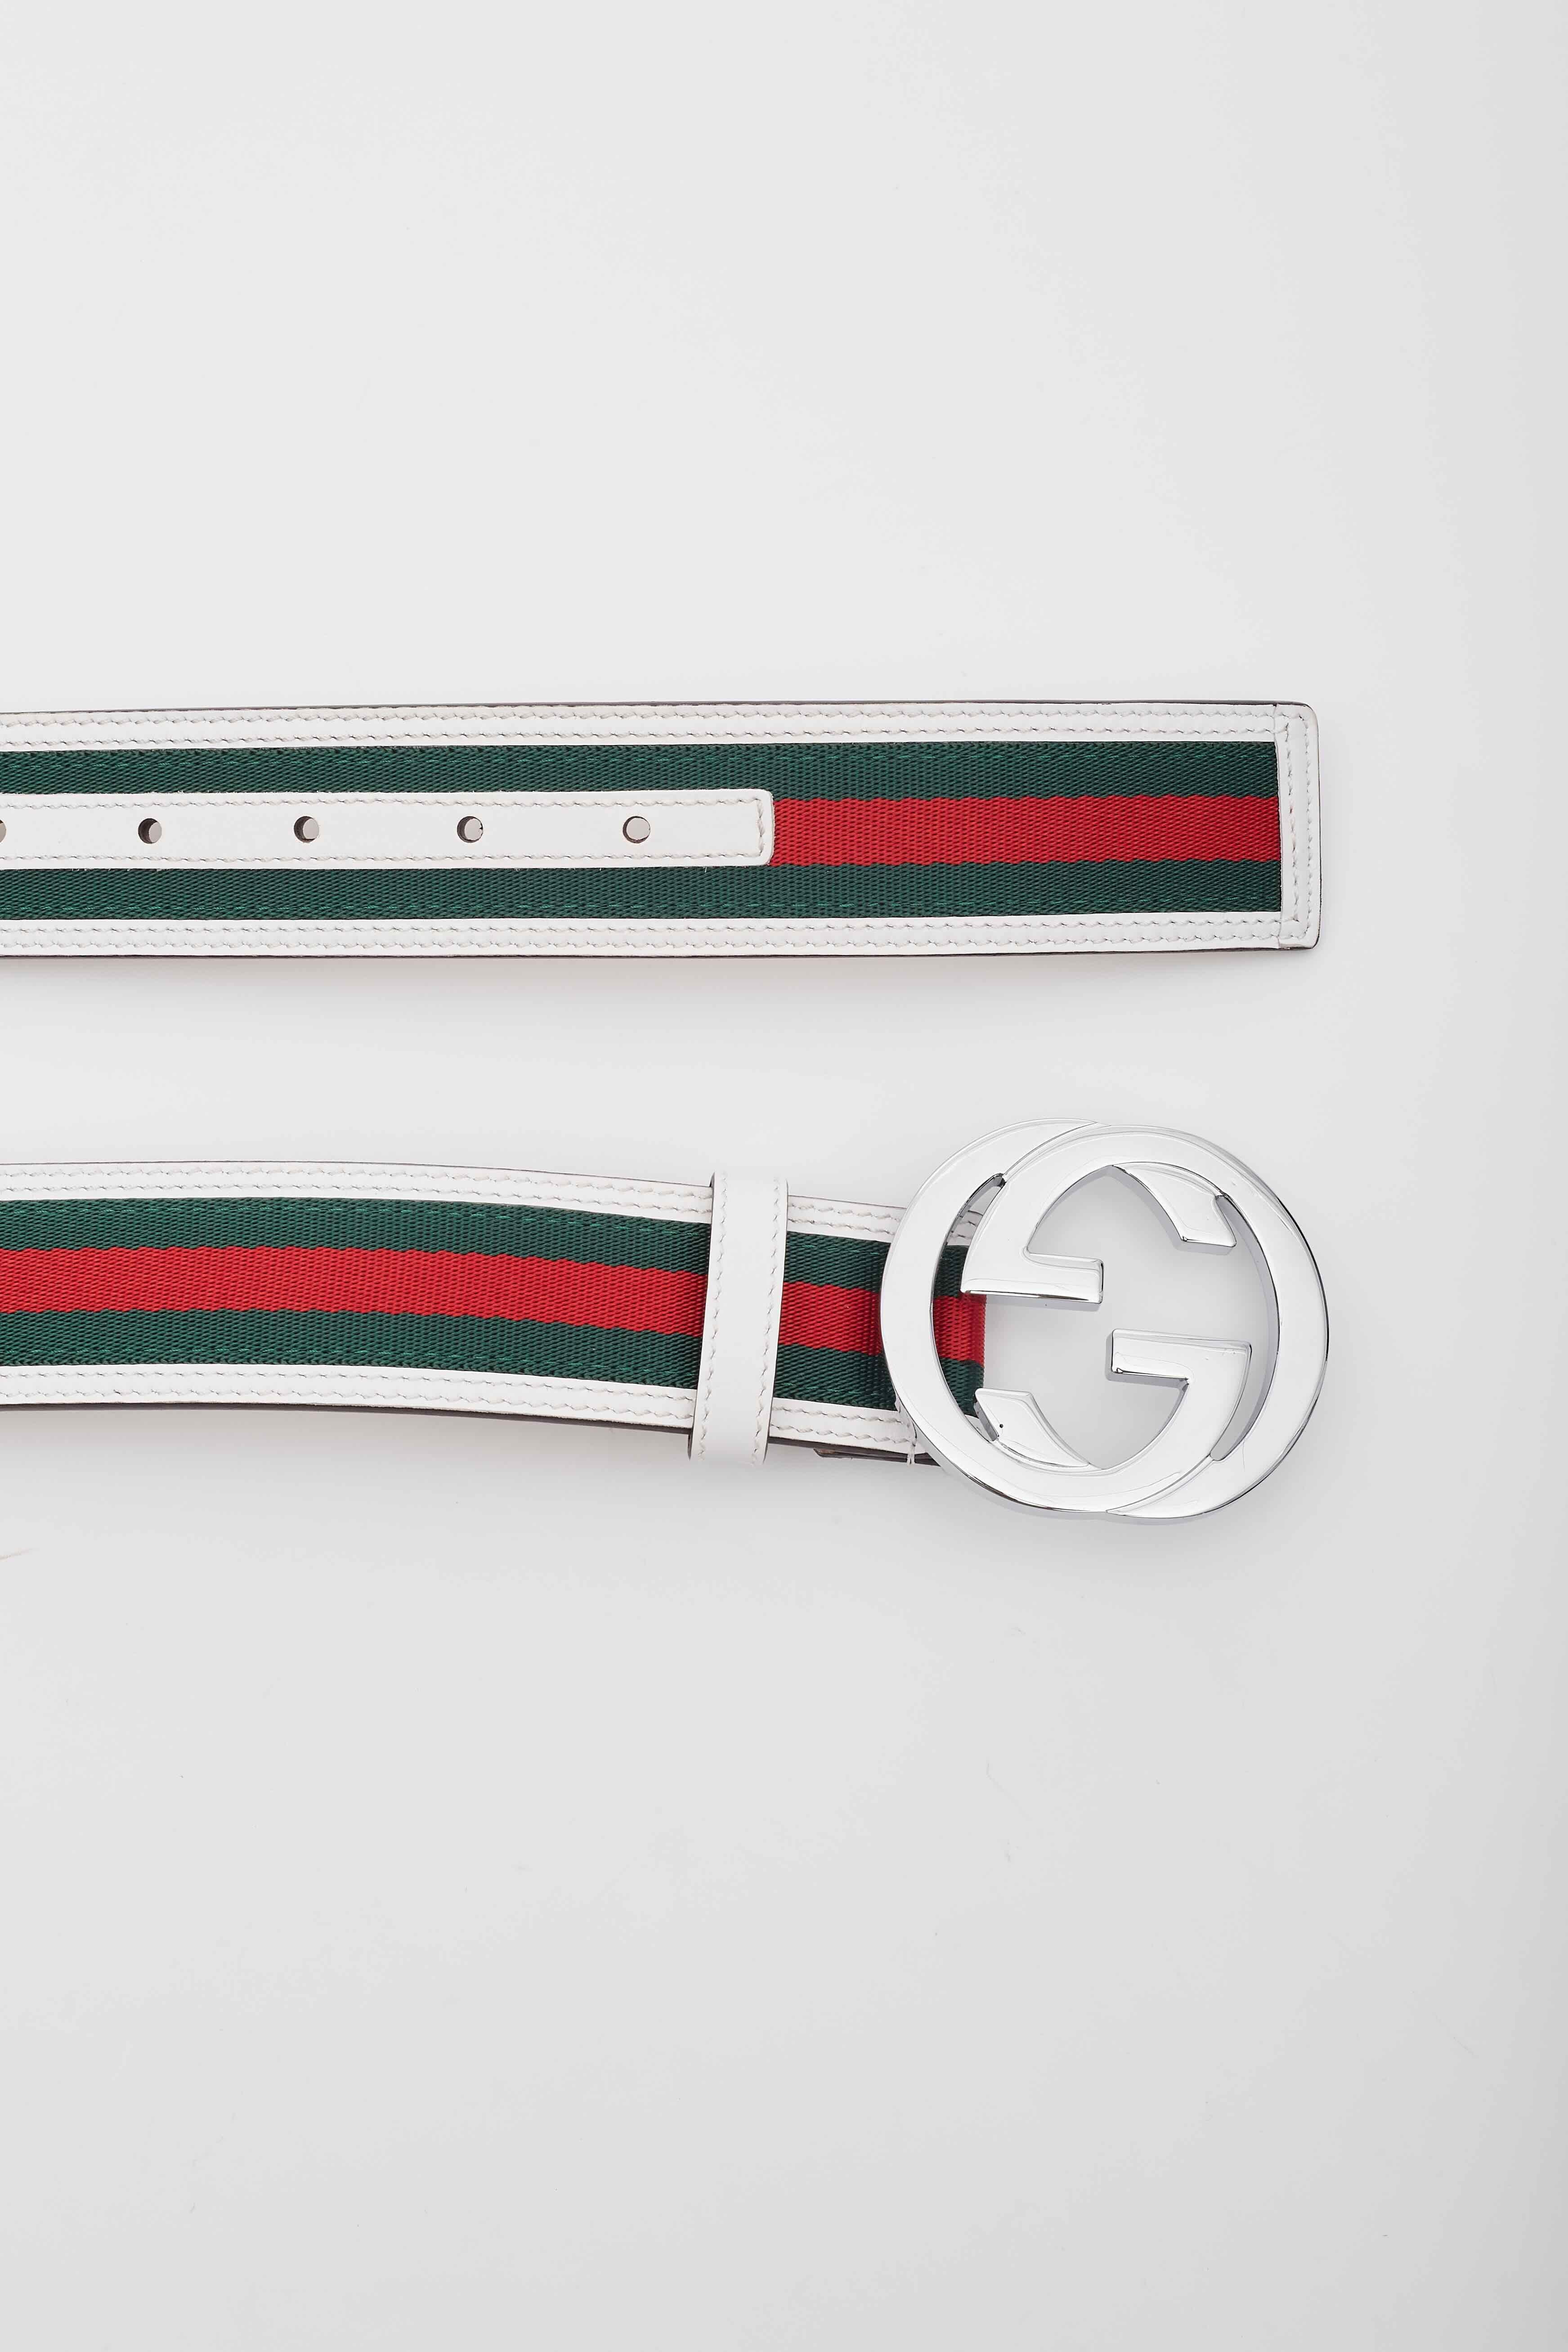 GUCCI WEB WHITE INTERLOCKING GG BELT (SIZE 100/40)

Color: White
Material: Canvas with leather trim
Style Code: 114984
Size: 100 cm / 40 inch
Length 43 inch & 1.5 inch
Condition: Excellent. Like new.

Made in Italy